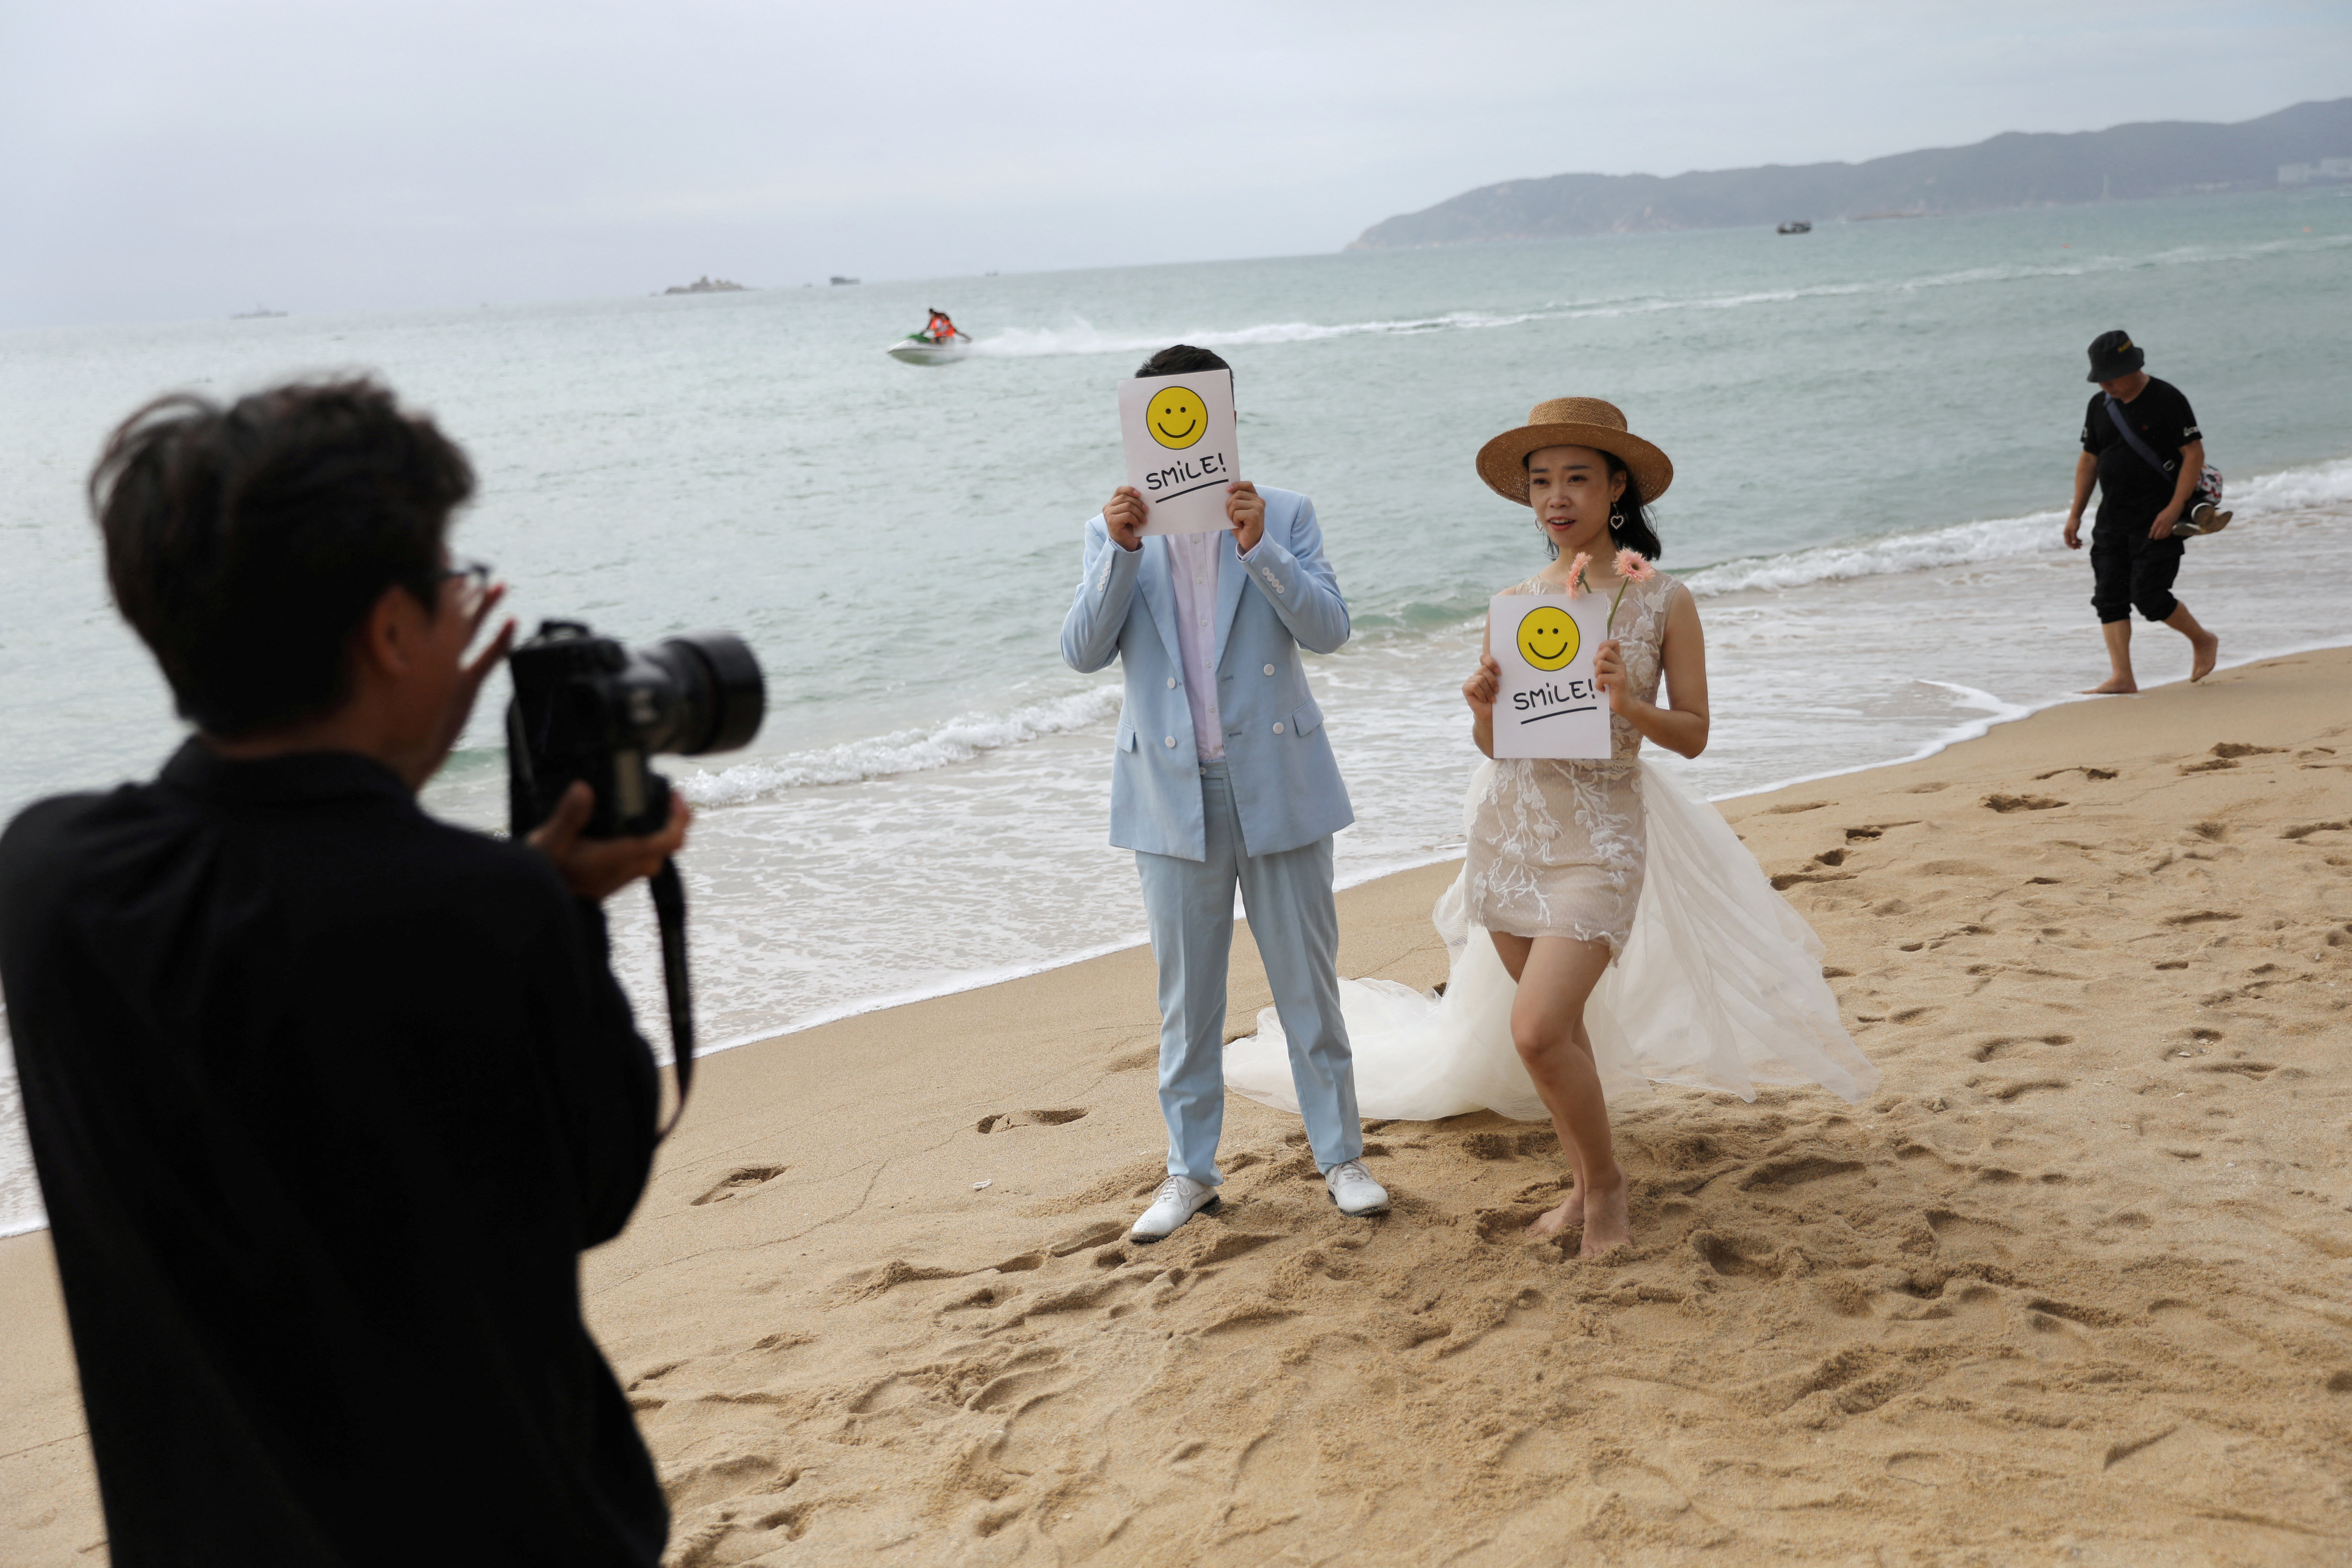 A couple poses for pictures during a wedding photoshoot session on Yalong Bay beach in Sanya